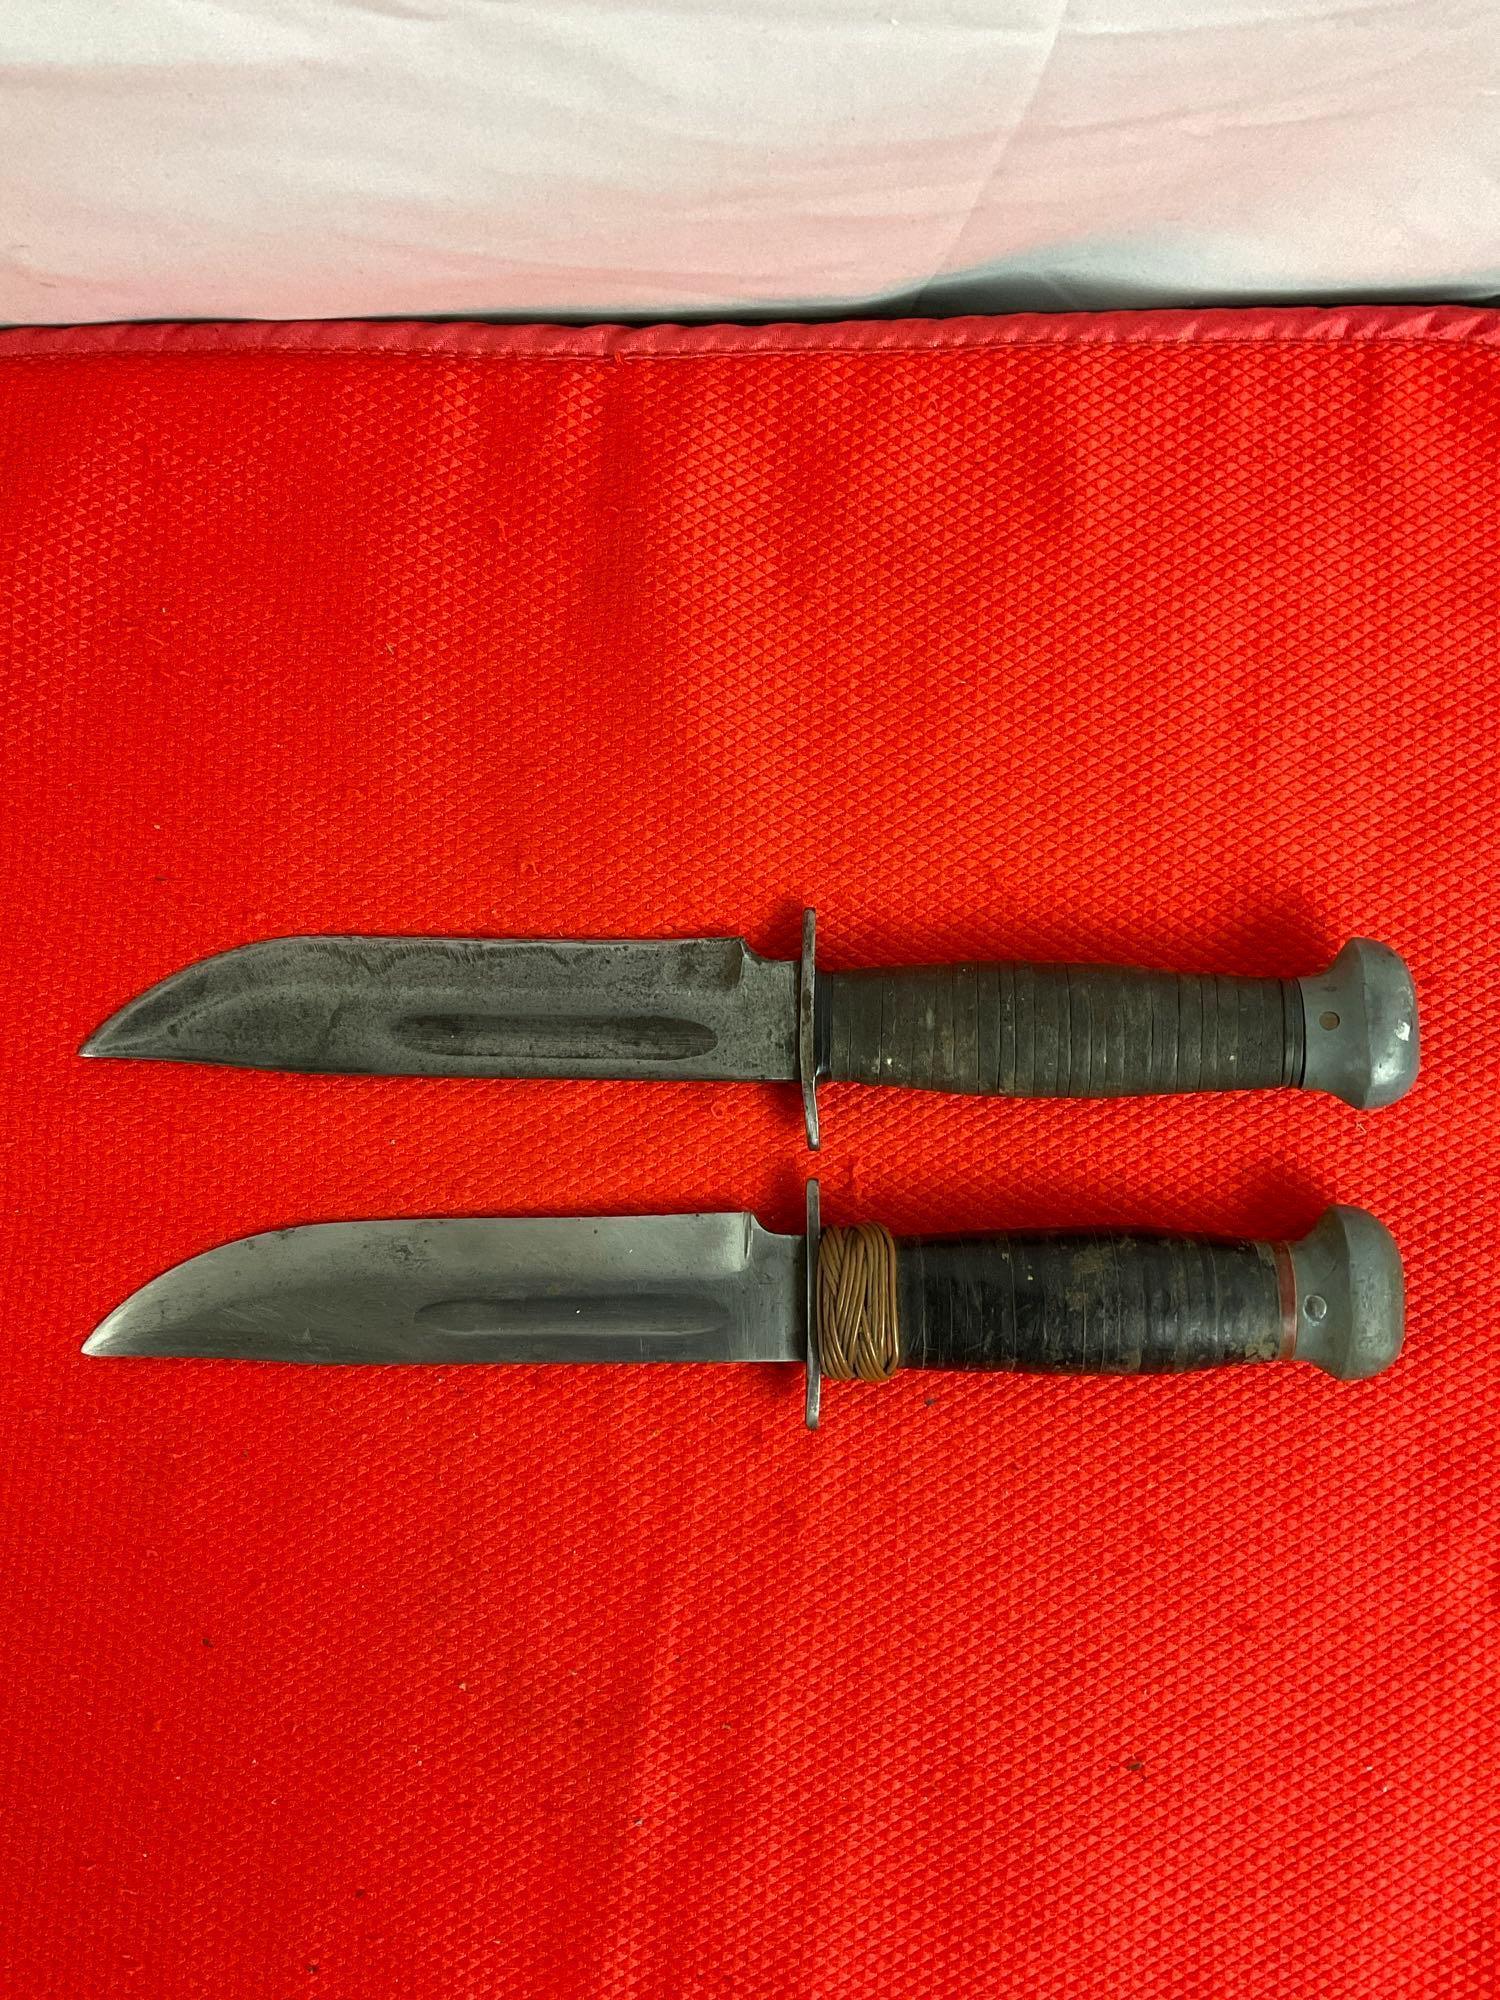 Pair Vintage WWII Era 1936 5.5" Steel Fixed Blade PAL Fighting Knives Model RH-36 w/ Sheathes. See